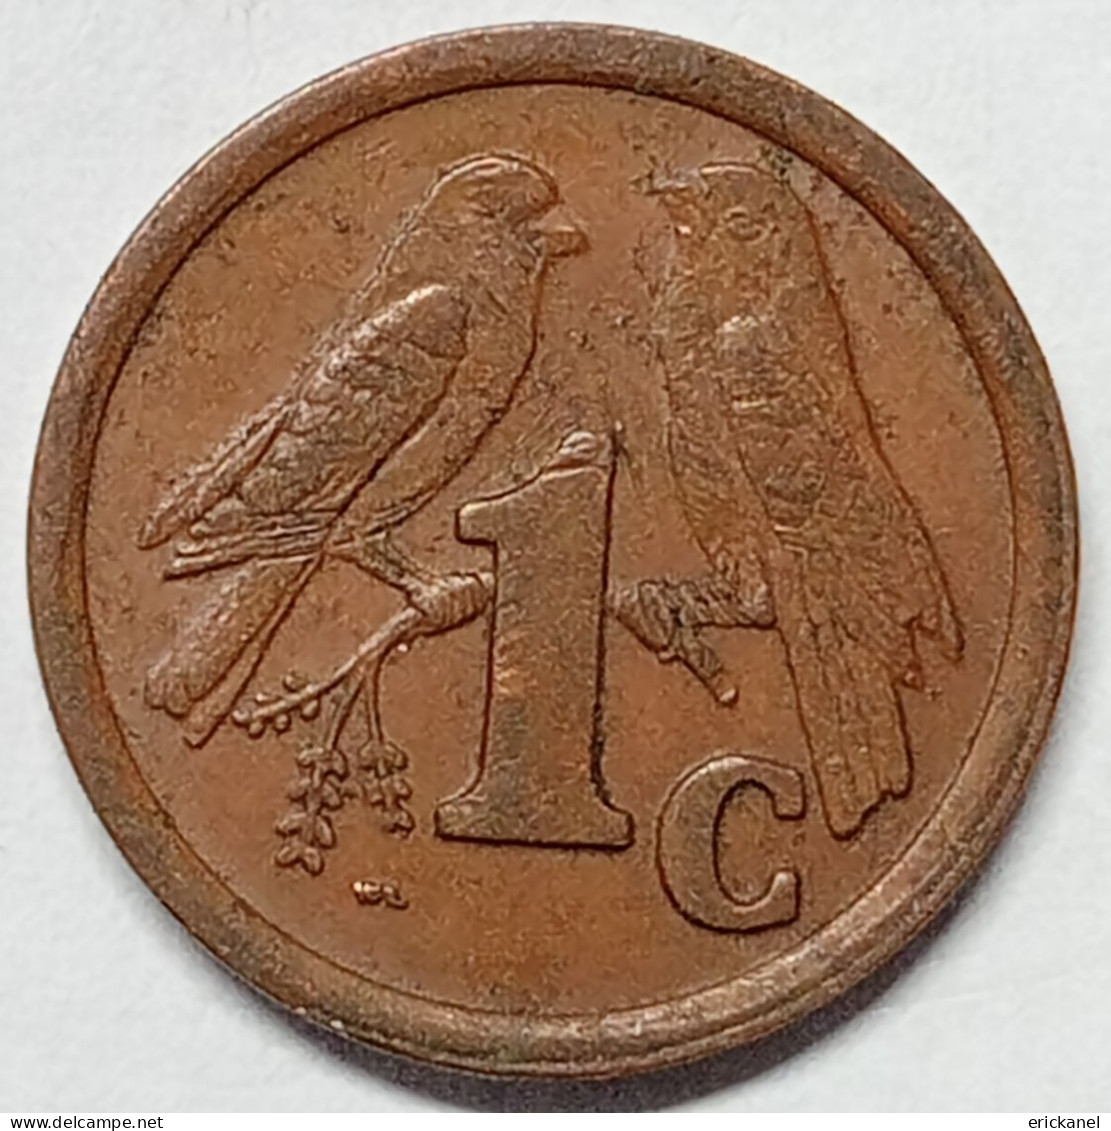 SOUTH AFRICA 1991 1 CENT - Sud Africa